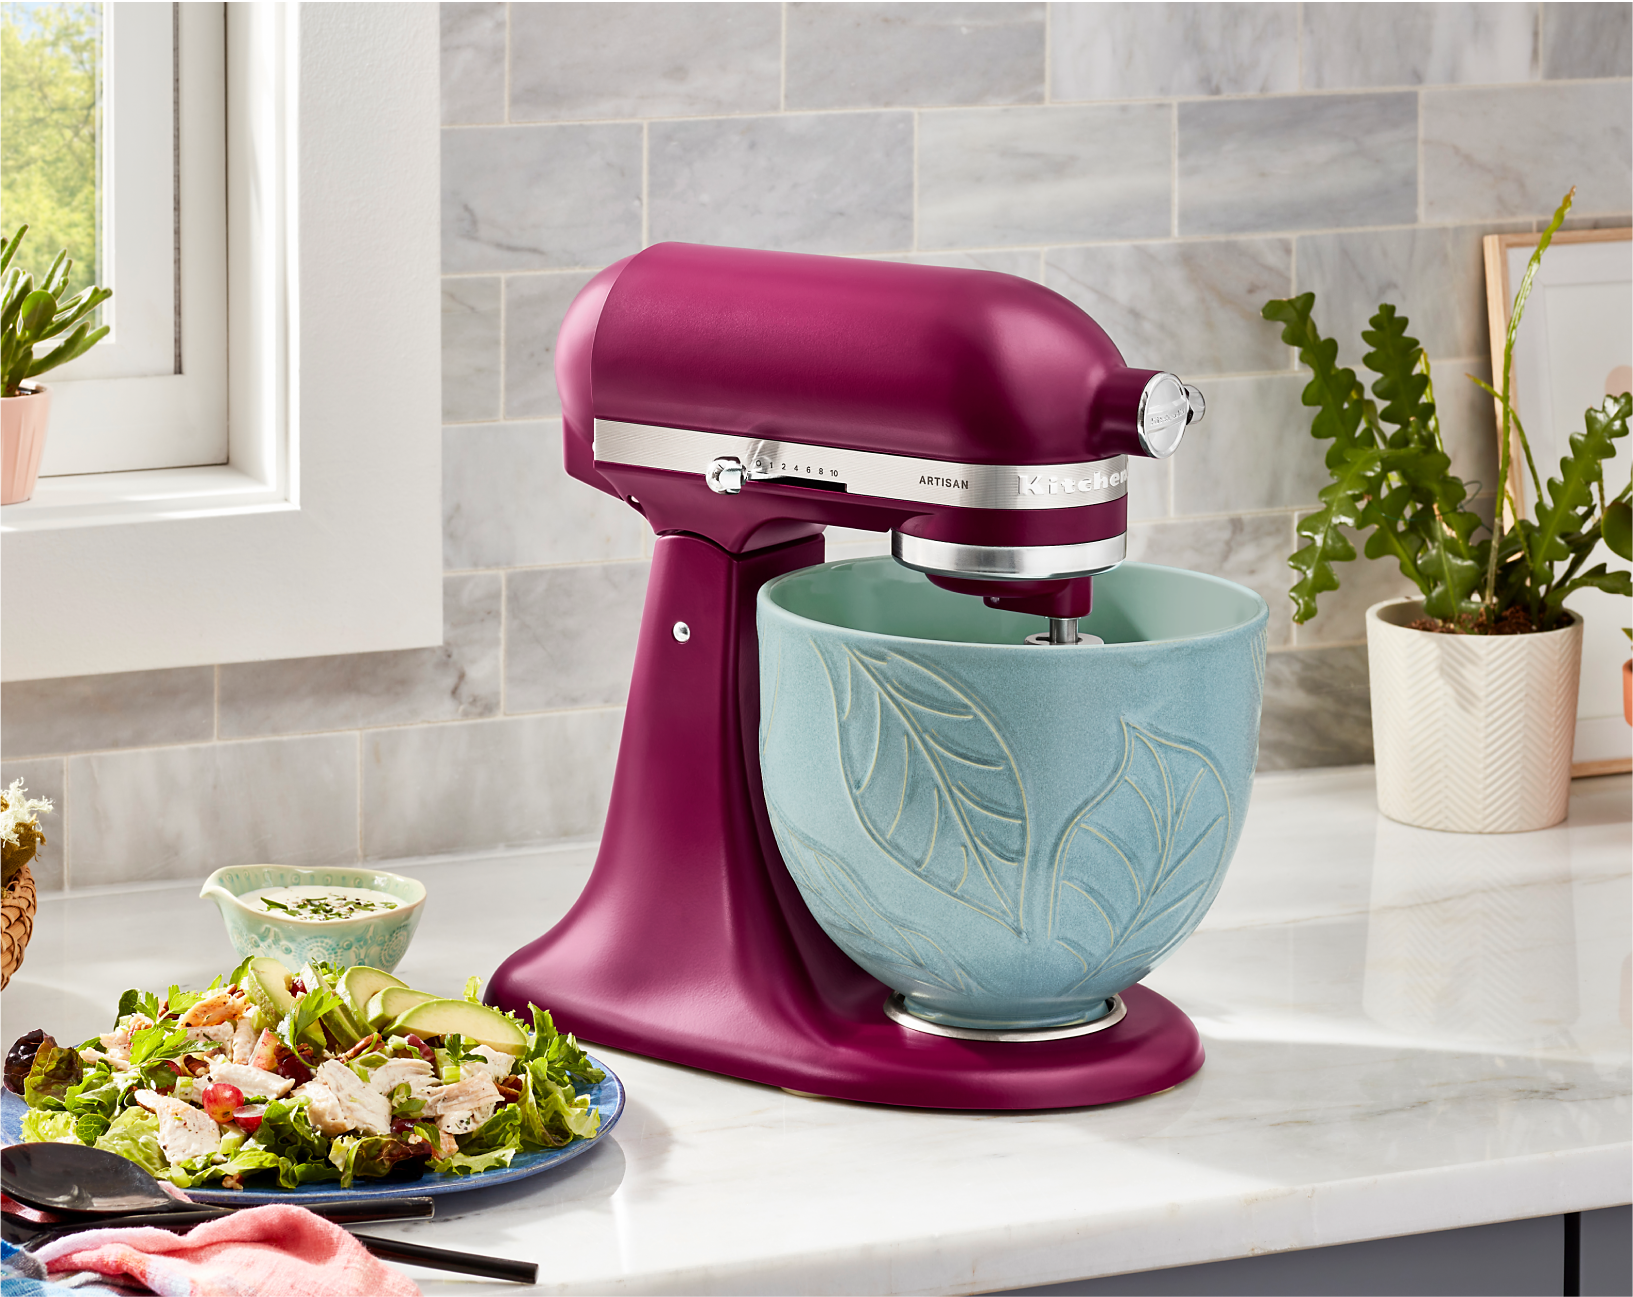 A KitchenAid® Stand Mixer in Beetroot on a countertop using an embossed blue bowl.